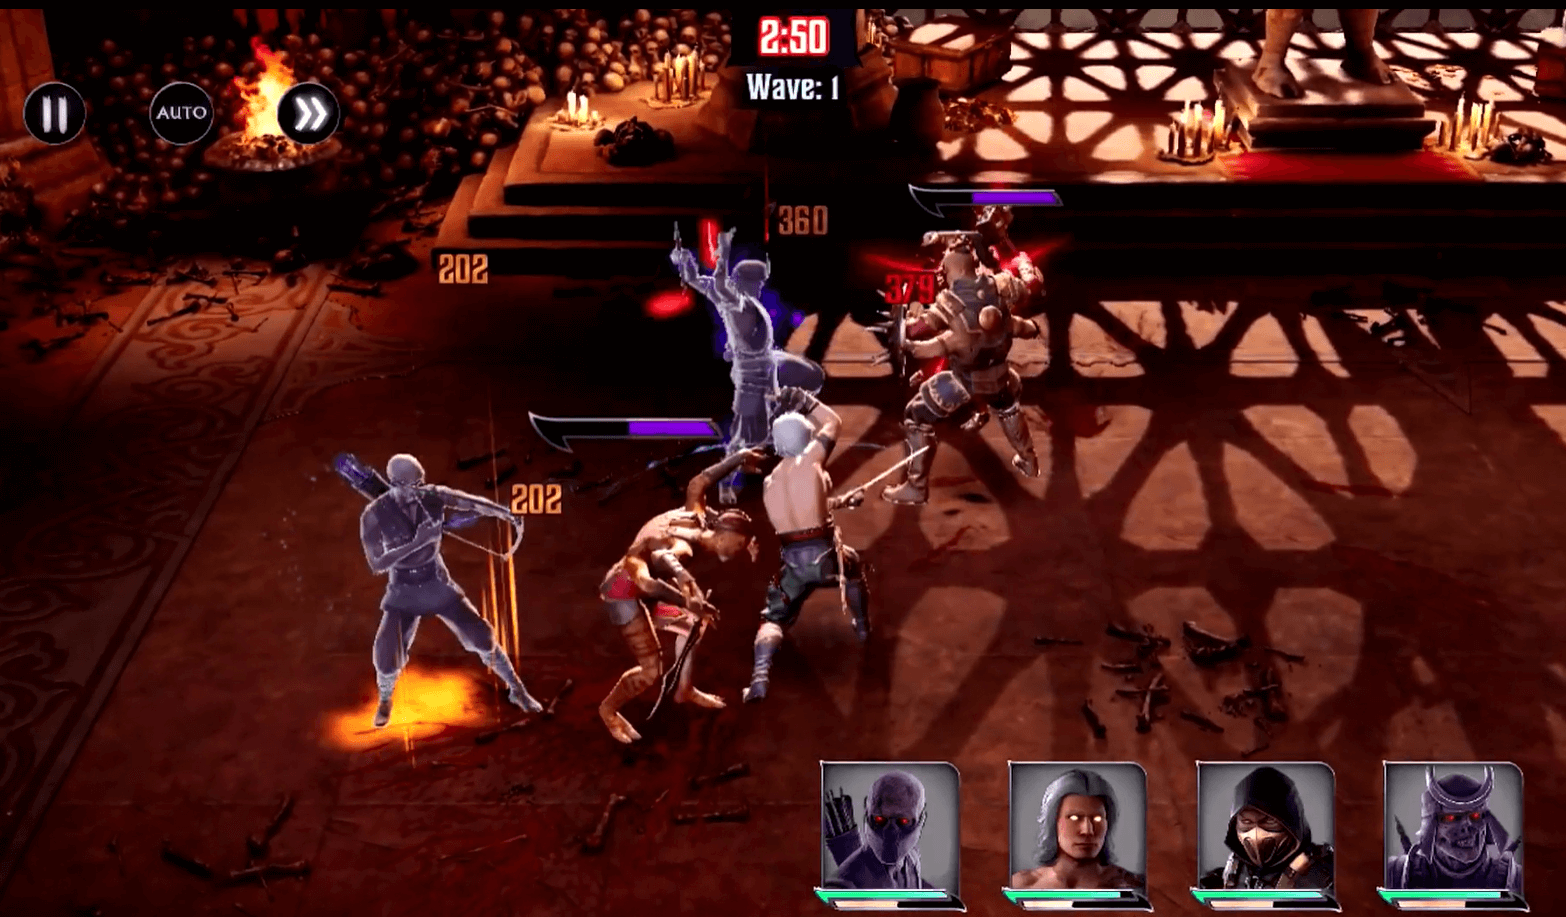 Mortal Kombat: Onslaught is a new mobile RPG coming next year